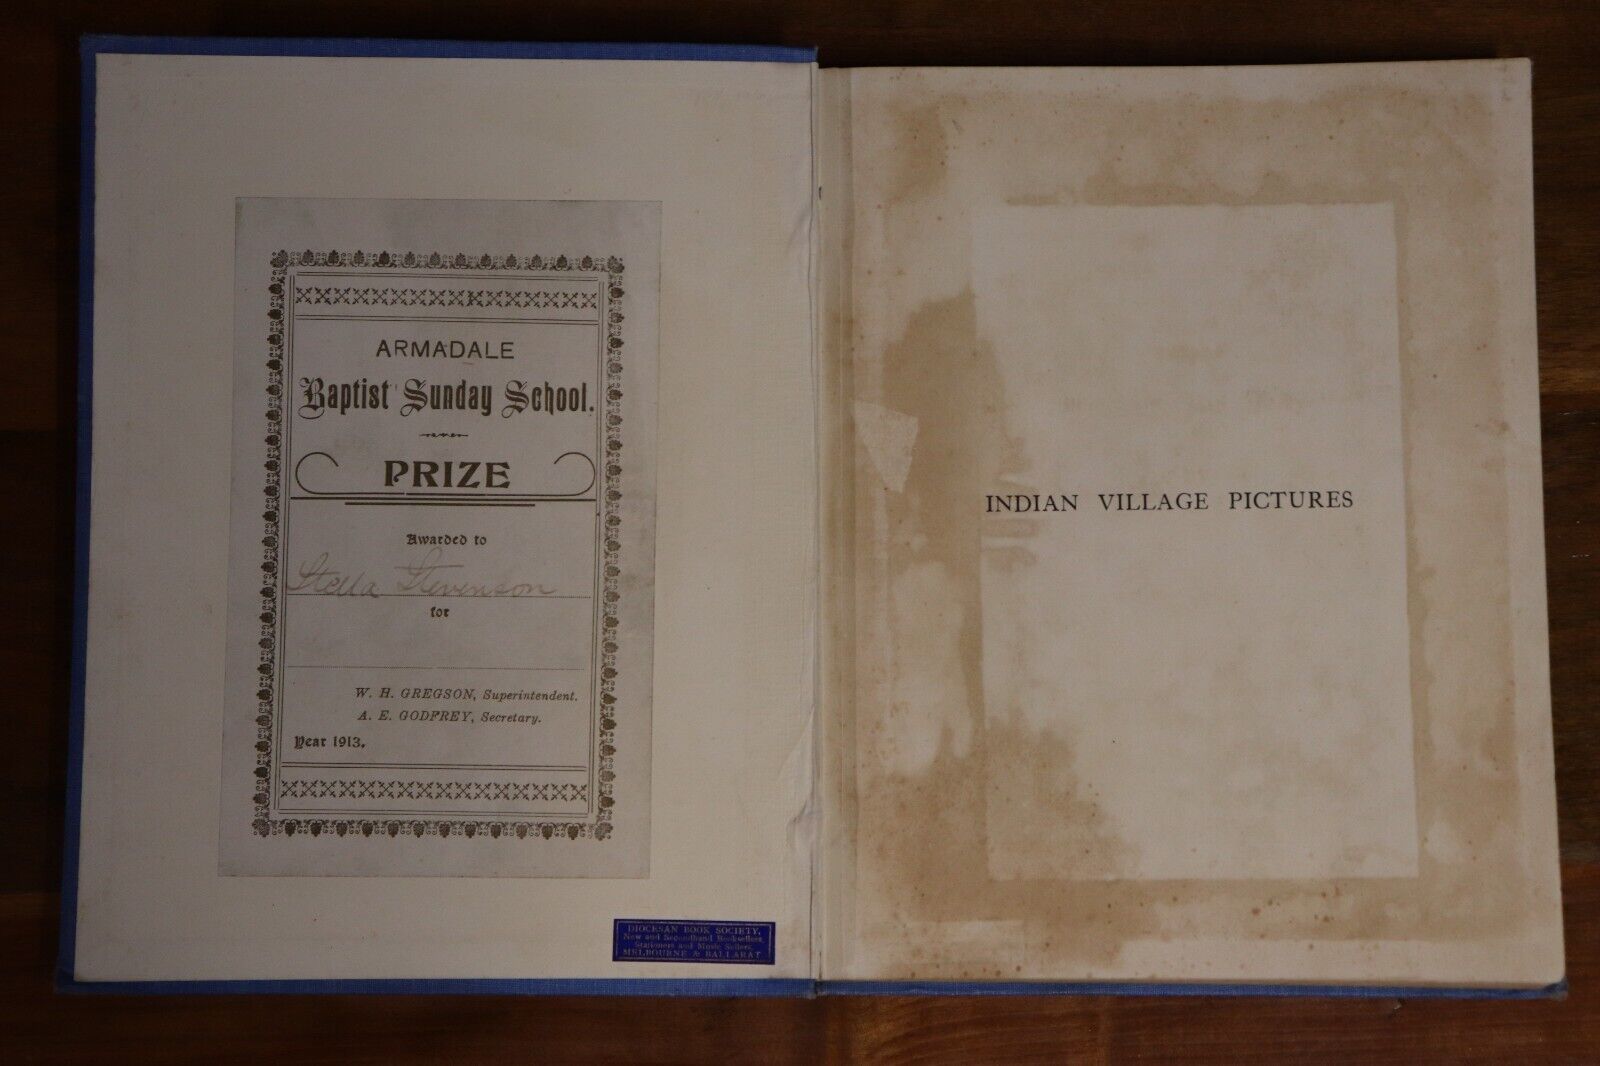 Indian Village Pictures by Henry Lester - 1910 - Antique History Book